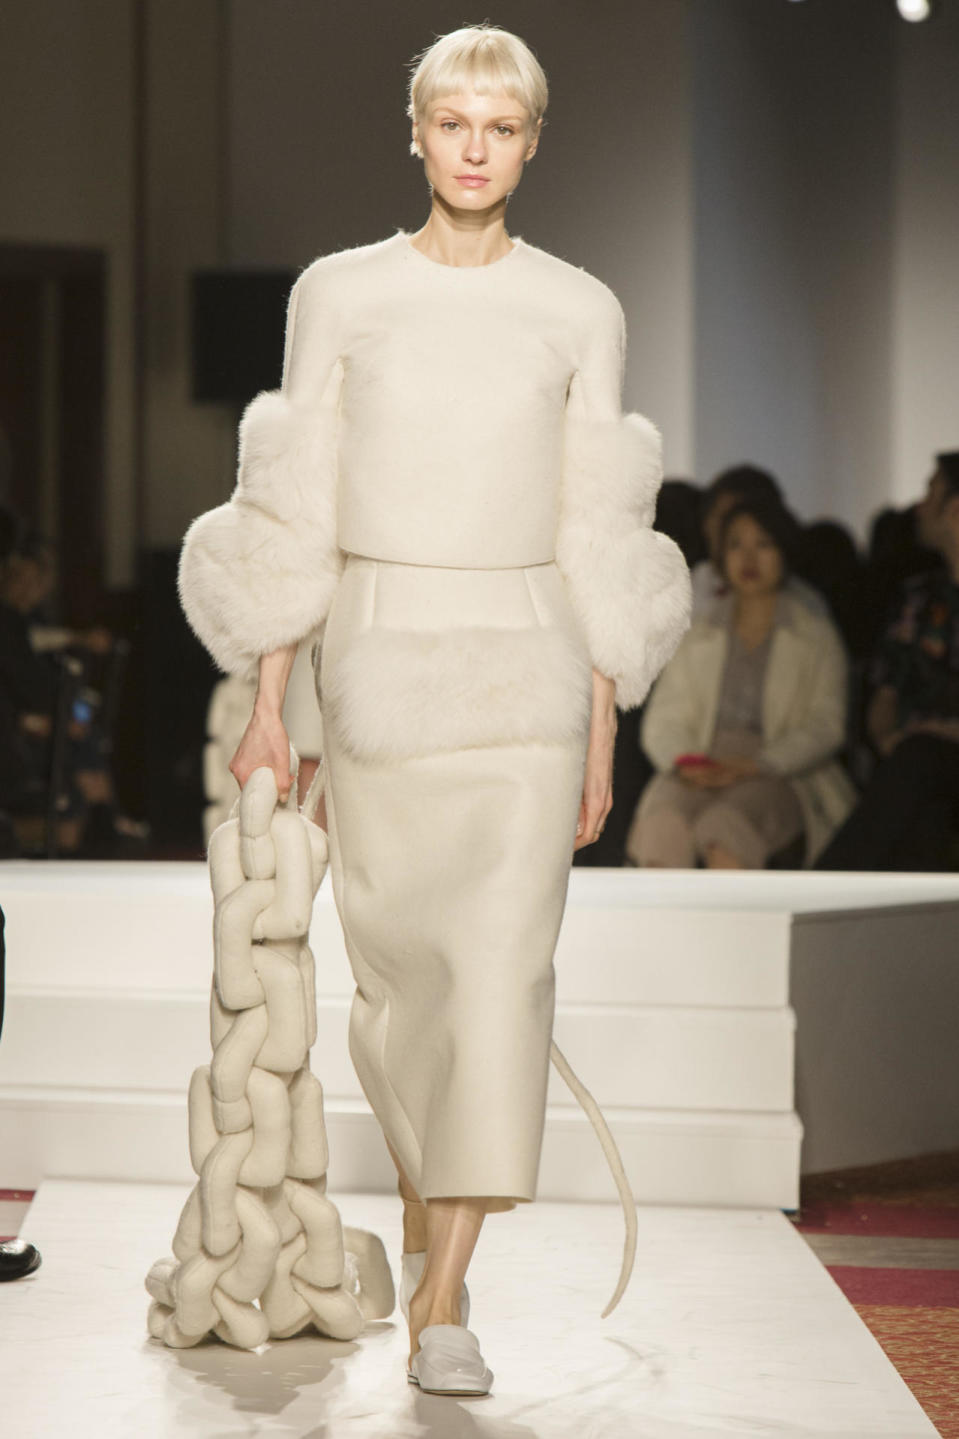 Parsons graduate Sijun Guo’s design made elegant use of structured separates with restrained fur accents.